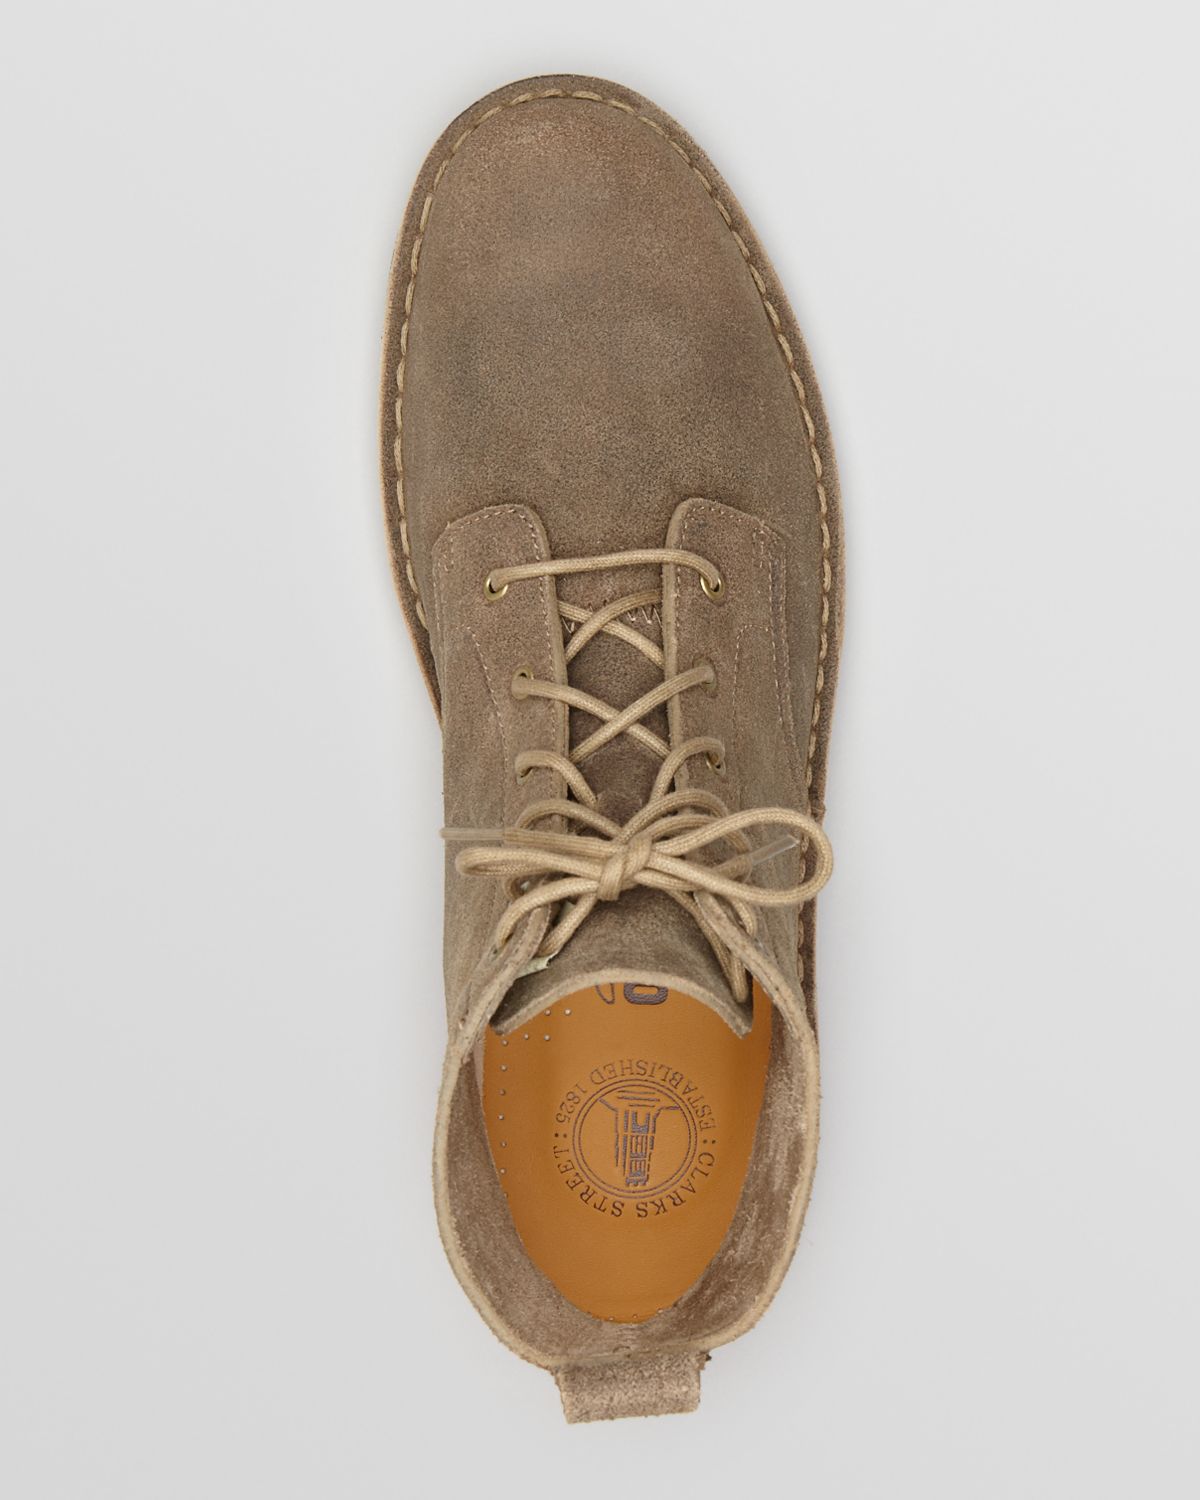 Clarks Desert Mali Suede Boots in Taupe Suede (Natural) for Men - Lyst